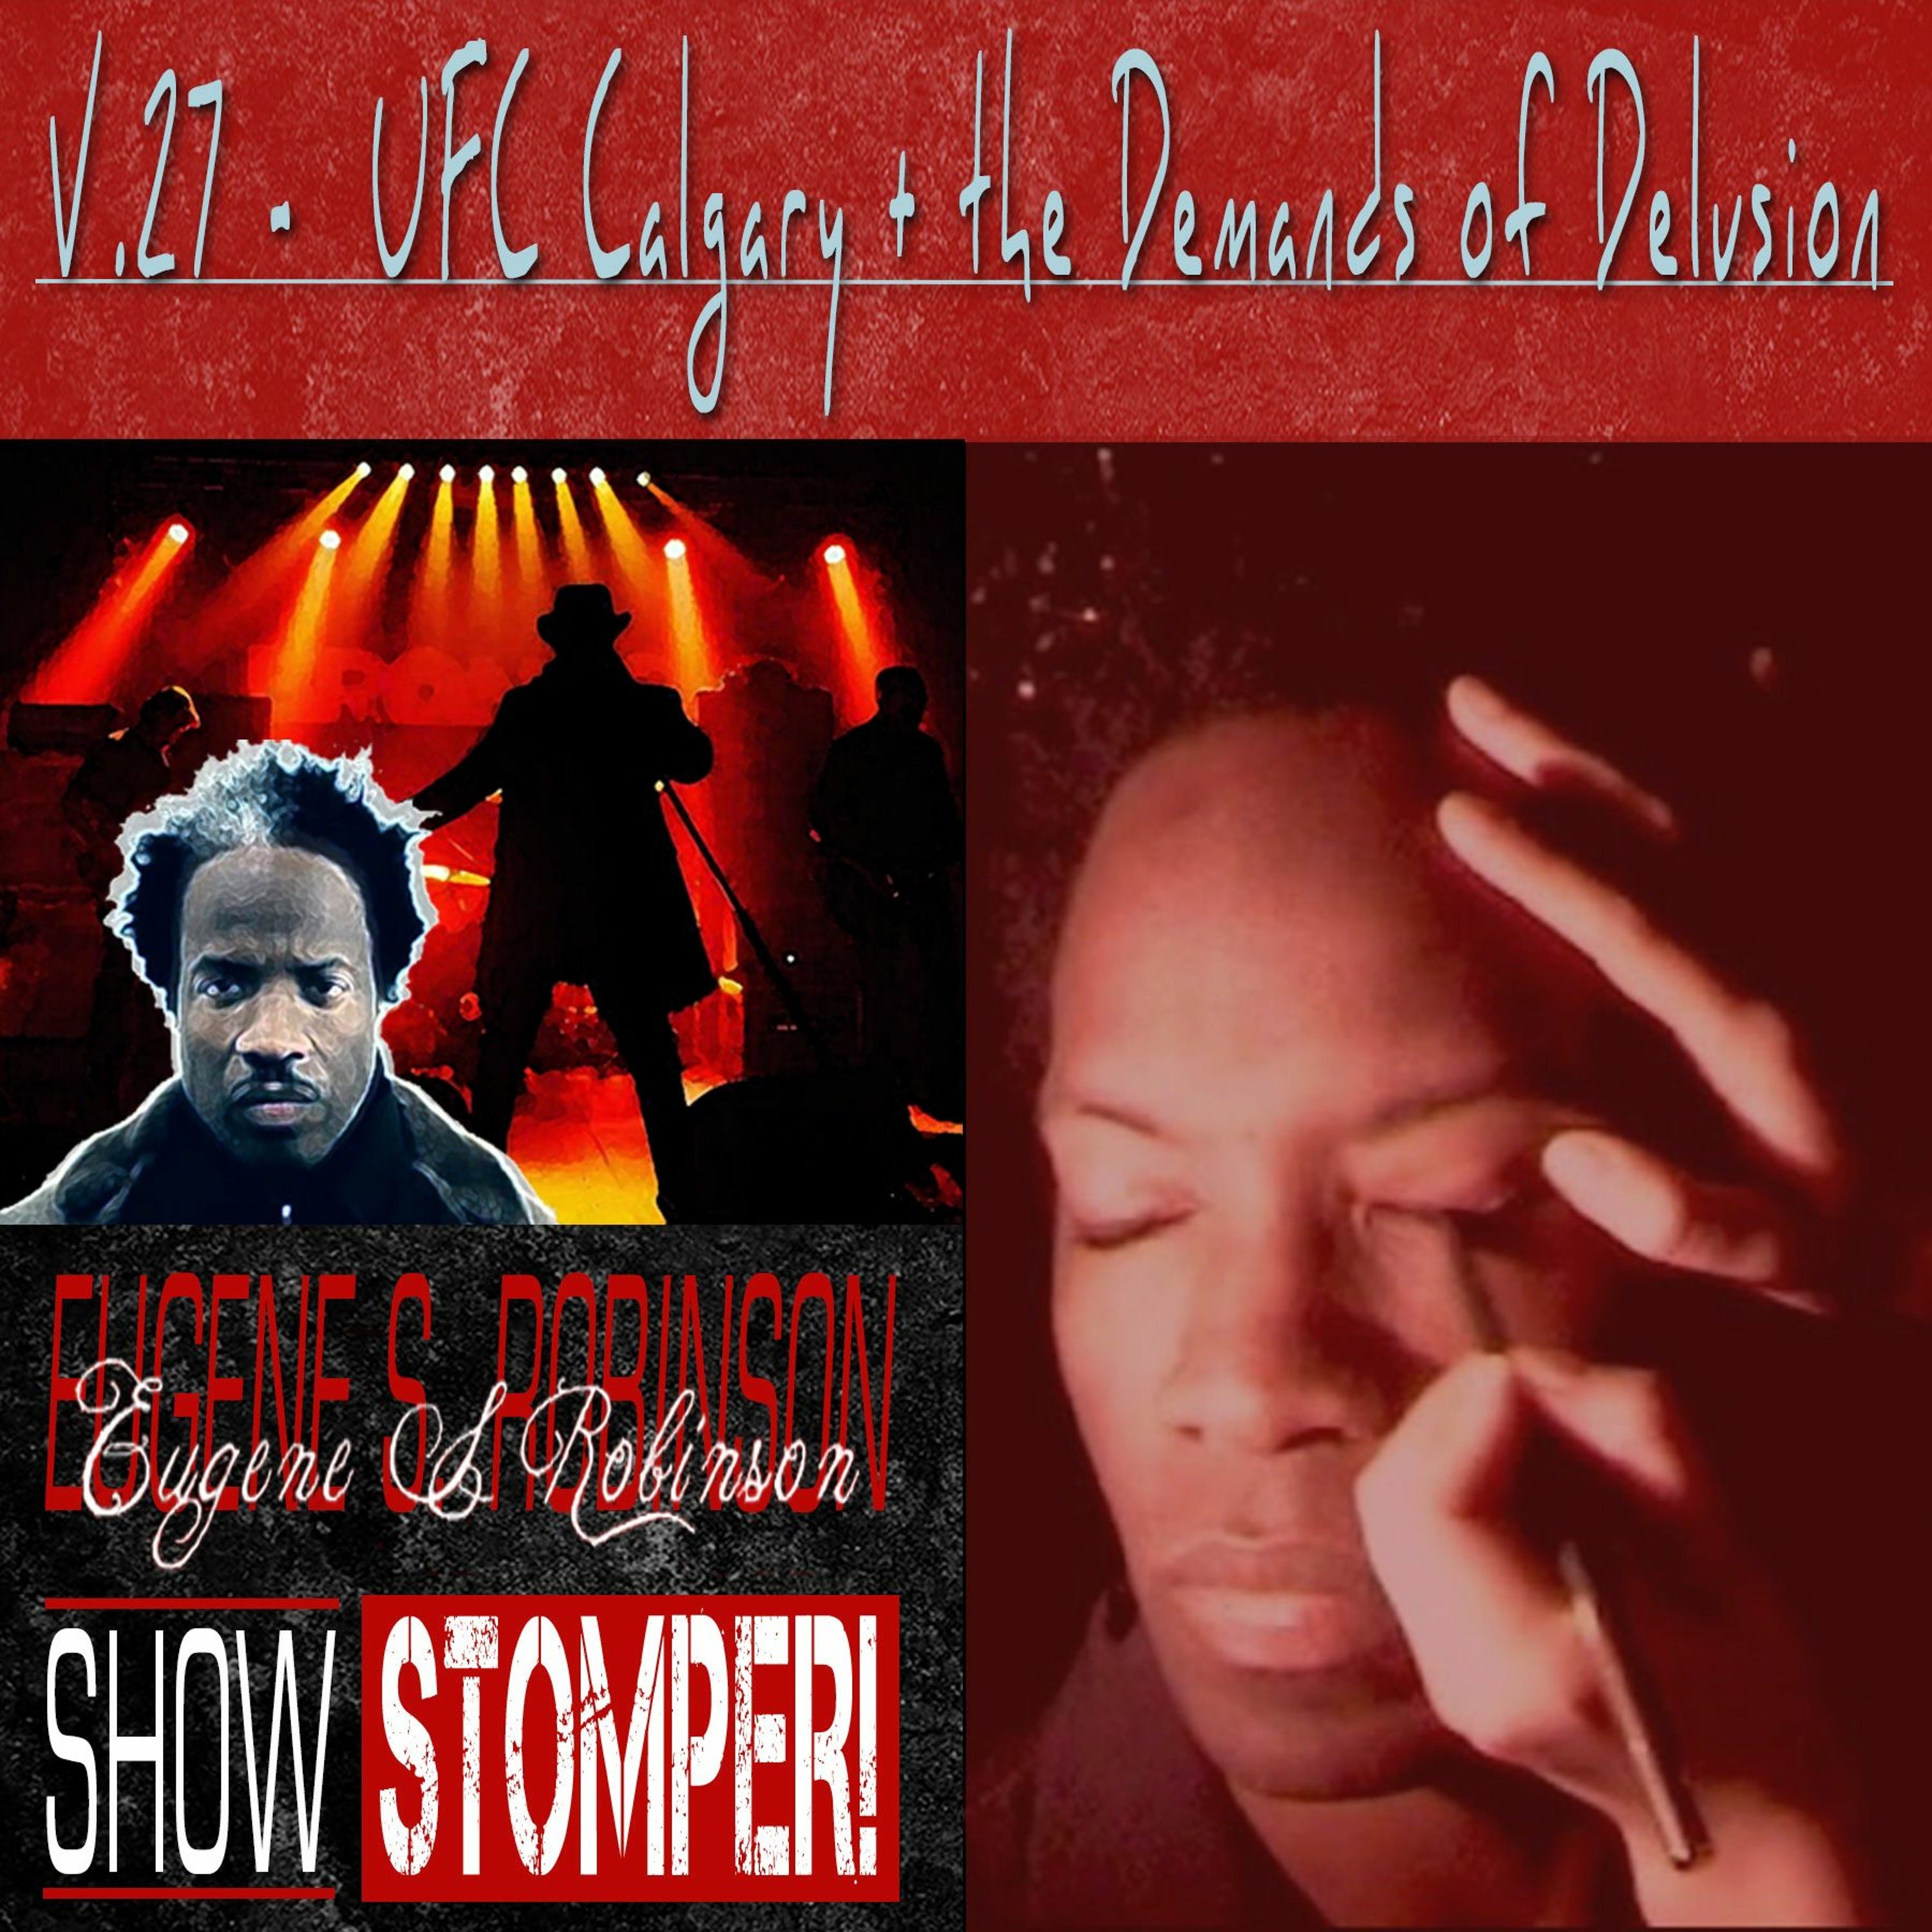 The Eugene S. Robinson Show Stomper! V.27 - UFC Calgary + The Demands Of Delusion